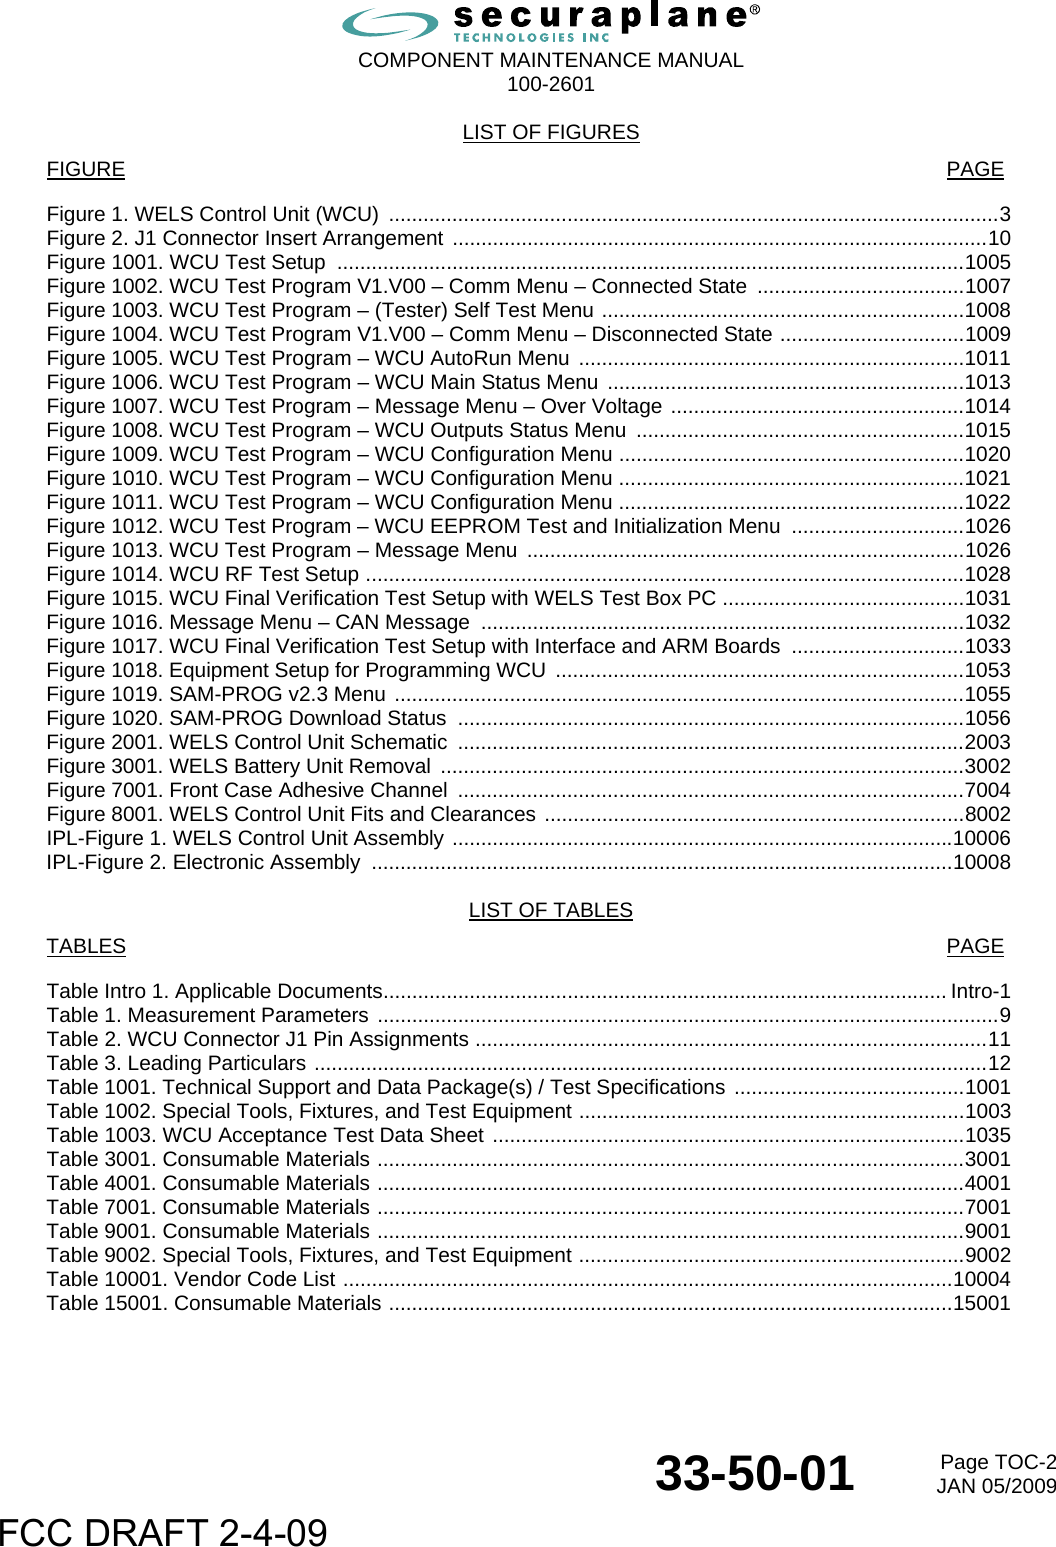  COMPONENT MAINTENANCE MANUAL  100-2601  33-50-01  Page TOC-2JAN 05/2009 LIST OF FIGURES FIGURE           PAGE Figure 1. WELS Control Unit (WCU) ..........................................................................................................3 Figure 2. J1 Connector Insert Arrangement .............................................................................................10 Figure 1001. WCU Test Setup  .............................................................................................................1005 Figure 1002. WCU Test Program V1.V00 – Comm Menu – Connected State  ....................................1007 Figure 1003. WCU Test Program – (Tester) Self Test Menu ...............................................................1008 Figure 1004. WCU Test Program V1.V00 – Comm Menu – Disconnected State ................................1009 Figure 1005. WCU Test Program – WCU AutoRun Menu ...................................................................1011 Figure 1006. WCU Test Program – WCU Main Status Menu ..............................................................1013 Figure 1007. WCU Test Program – Message Menu – Over Voltage ...................................................1014 Figure 1008. WCU Test Program – WCU Outputs Status Menu .........................................................1015 Figure 1009. WCU Test Program – WCU Configuration Menu ............................................................1020 Figure 1010. WCU Test Program – WCU Configuration Menu ............................................................1021 Figure 1011. WCU Test Program – WCU Configuration Menu ............................................................1022 Figure 1012. WCU Test Program – WCU EEPROM Test and Initialization Menu  ..............................1026 Figure 1013. WCU Test Program – Message Menu  ............................................................................1026 Figure 1014. WCU RF Test Setup ........................................................................................................1028 Figure 1015. WCU Final Verification Test Setup with WELS Test Box PC ..........................................1031 Figure 1016. Message Menu – CAN Message  ....................................................................................1032 Figure 1017. WCU Final Verification Test Setup with Interface and ARM Boards ..............................1033 Figure 1018. Equipment Setup for Programming WCU .......................................................................1053 Figure 1019. SAM-PROG v2.3 Menu ...................................................................................................1055 Figure 1020. SAM-PROG Download Status ........................................................................................1056 Figure 2001. WELS Control Unit Schematic ........................................................................................2003 Figure 3001. WELS Battery Unit Removal ...........................................................................................3002 Figure 7001. Front Case Adhesive Channel ........................................................................................7004 Figure 8001. WELS Control Unit Fits and Clearances .........................................................................8002 IPL-Figure 1. WELS Control Unit Assembly .......................................................................................10006 IPL-Figure 2. Electronic Assembly  .....................................................................................................10008  LIST OF TABLES TABLES           PAGE Table Intro 1. Applicable Documents.................................................................................................. Intro-1 Table 1. Measurement Parameters ............................................................................................................9 Table 2. WCU Connector J1 Pin Assignments .........................................................................................11 Table 3. Leading Particulars .....................................................................................................................12 Table 1001. Technical Support and Data Package(s) / Test Specifications ........................................1001 Table 1002. Special Tools, Fixtures, and Test Equipment ...................................................................1003 Table 1003. WCU Acceptance Test Data Sheet ..................................................................................1035 Table 3001. Consumable Materials ......................................................................................................3001 Table 4001. Consumable Materials ......................................................................................................4001 Table 7001. Consumable Materials ......................................................................................................7001 Table 9001. Consumable Materials ......................................................................................................9001 Table 9002. Special Tools, Fixtures, and Test Equipment ...................................................................9002 Table 10001. Vendor Code List ..........................................................................................................10004 Table 15001. Consumable Materials ..................................................................................................15001  FCC DRAFT 2-4-09